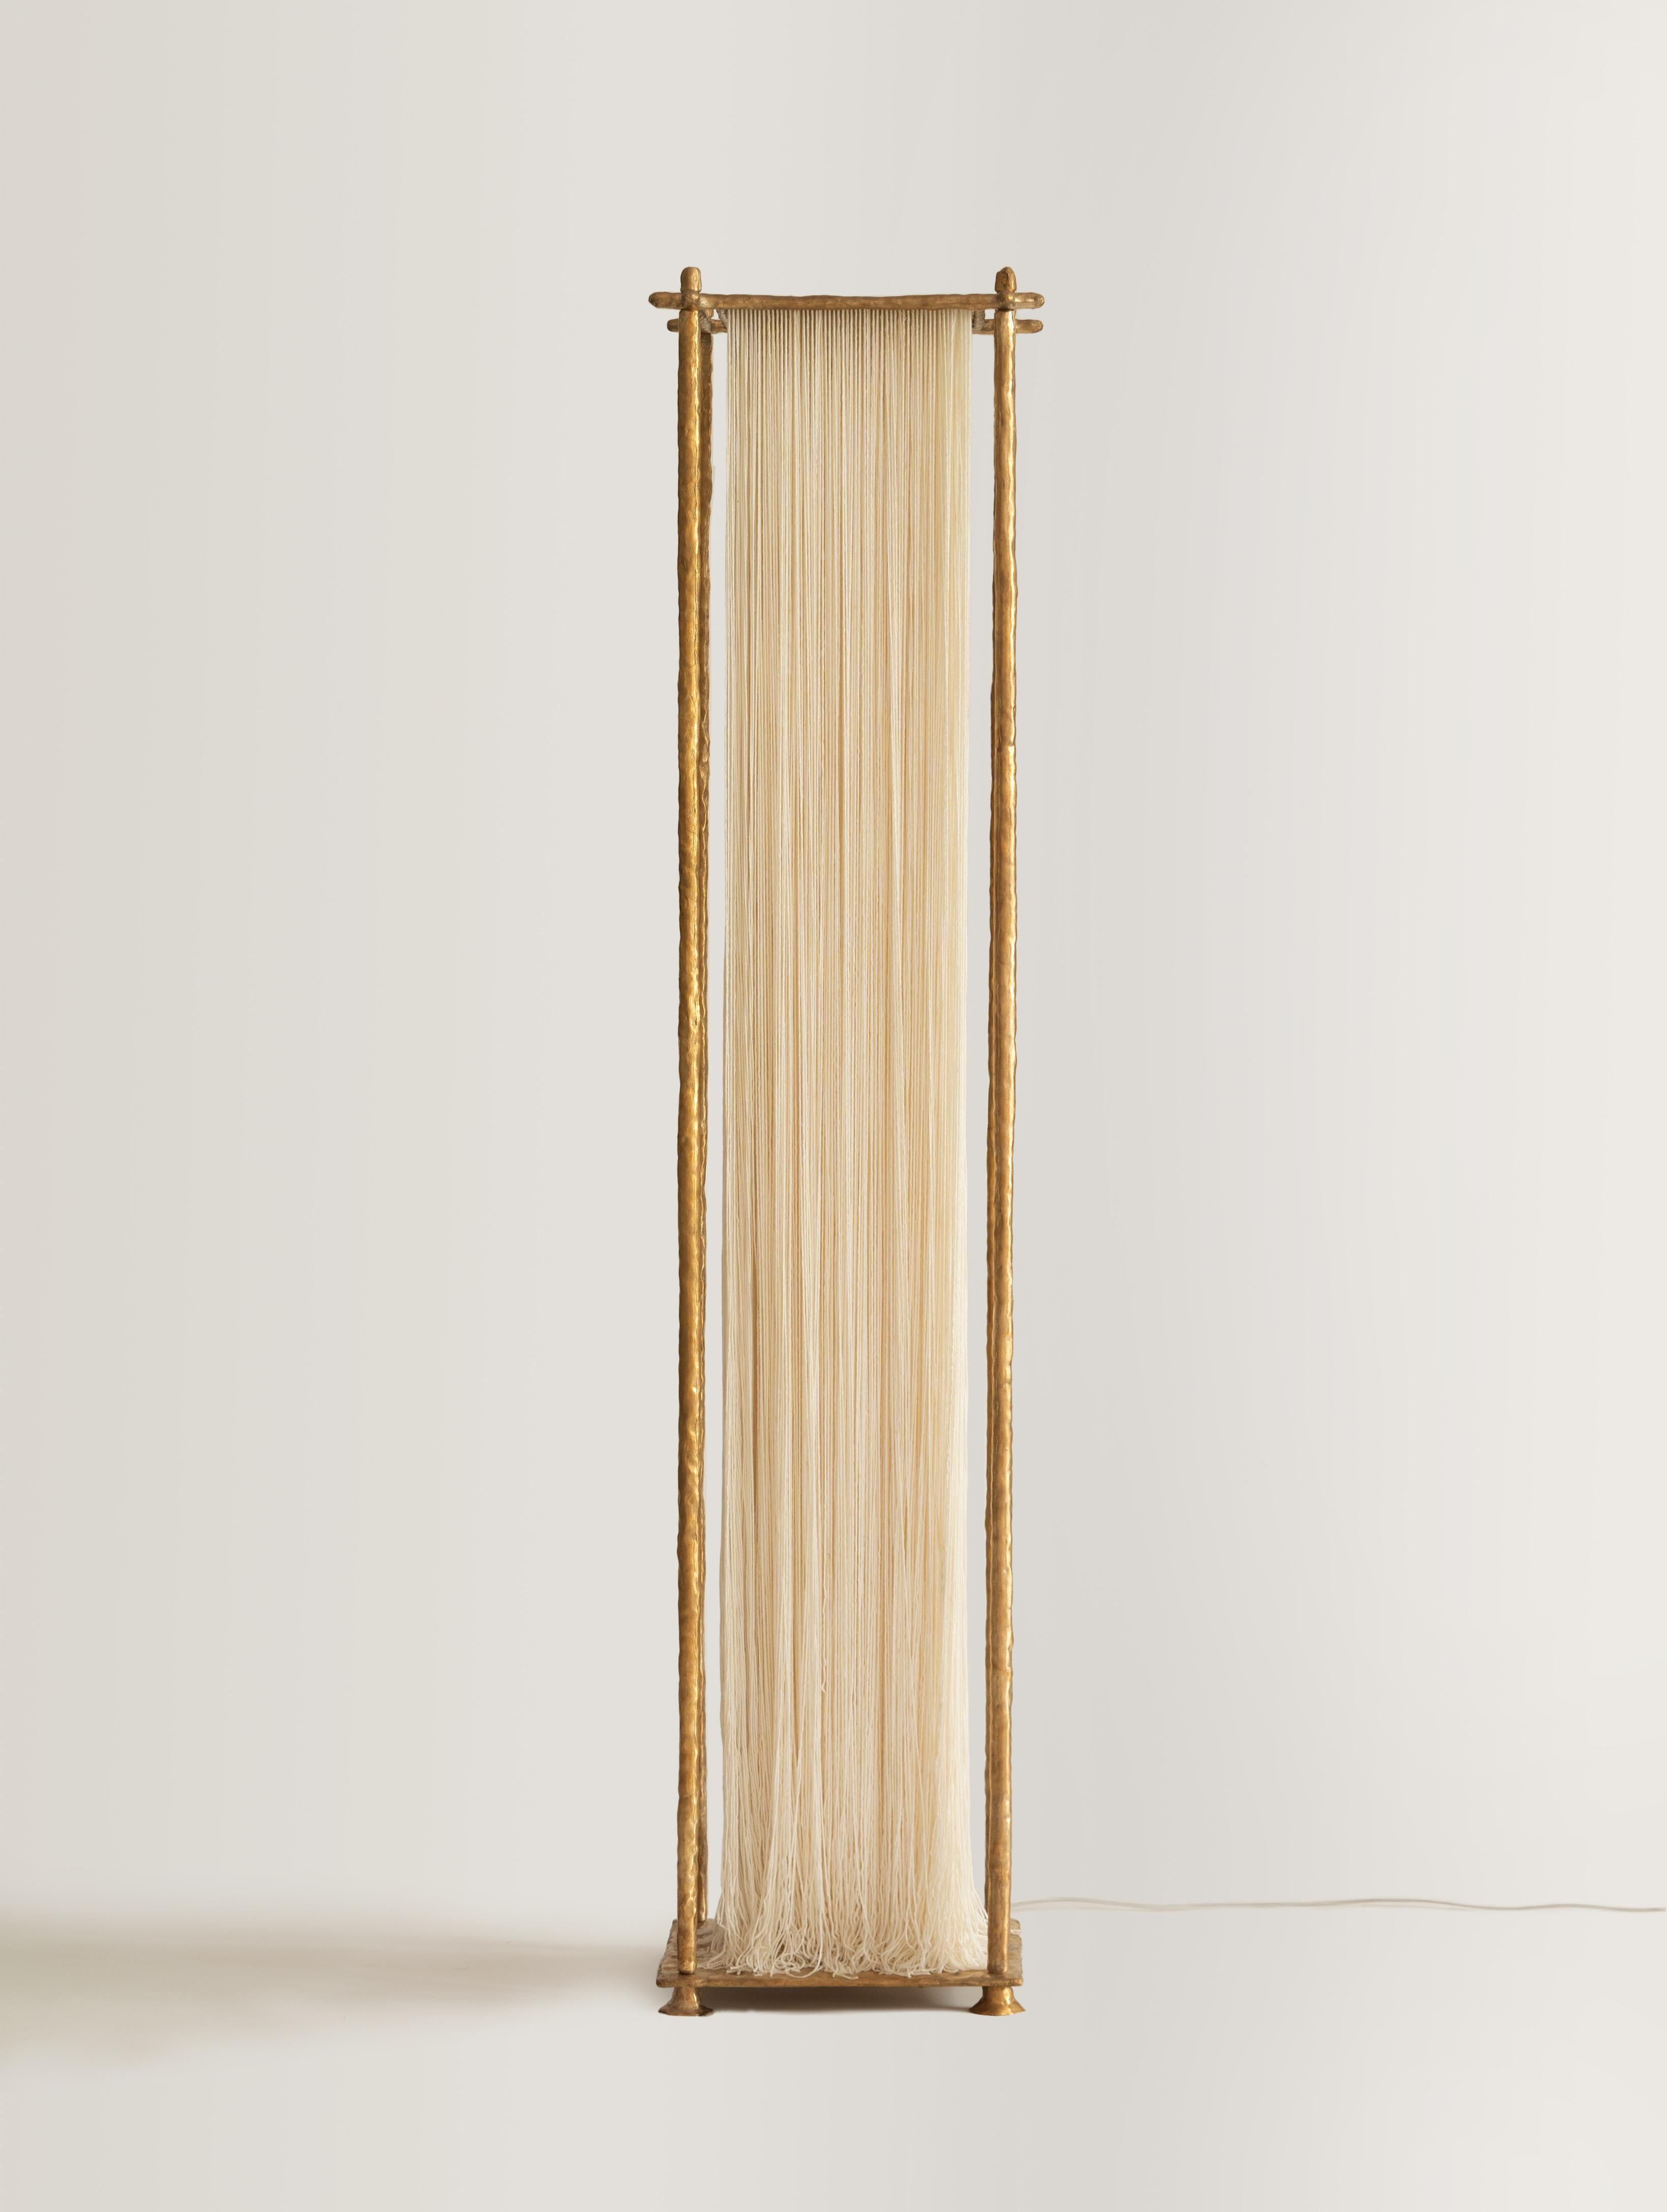 Ito Floor Lamp by Stem Design
Dimensions: D 35 x W 35 x H 182.5 cm. 
Materials: Cast brass and cotton threads.
Finish: Hand buffed. 
Weight: 33 kg.

Finished and assembled by hand in India. Please contact us. 

The Ito floor lamp embodies the